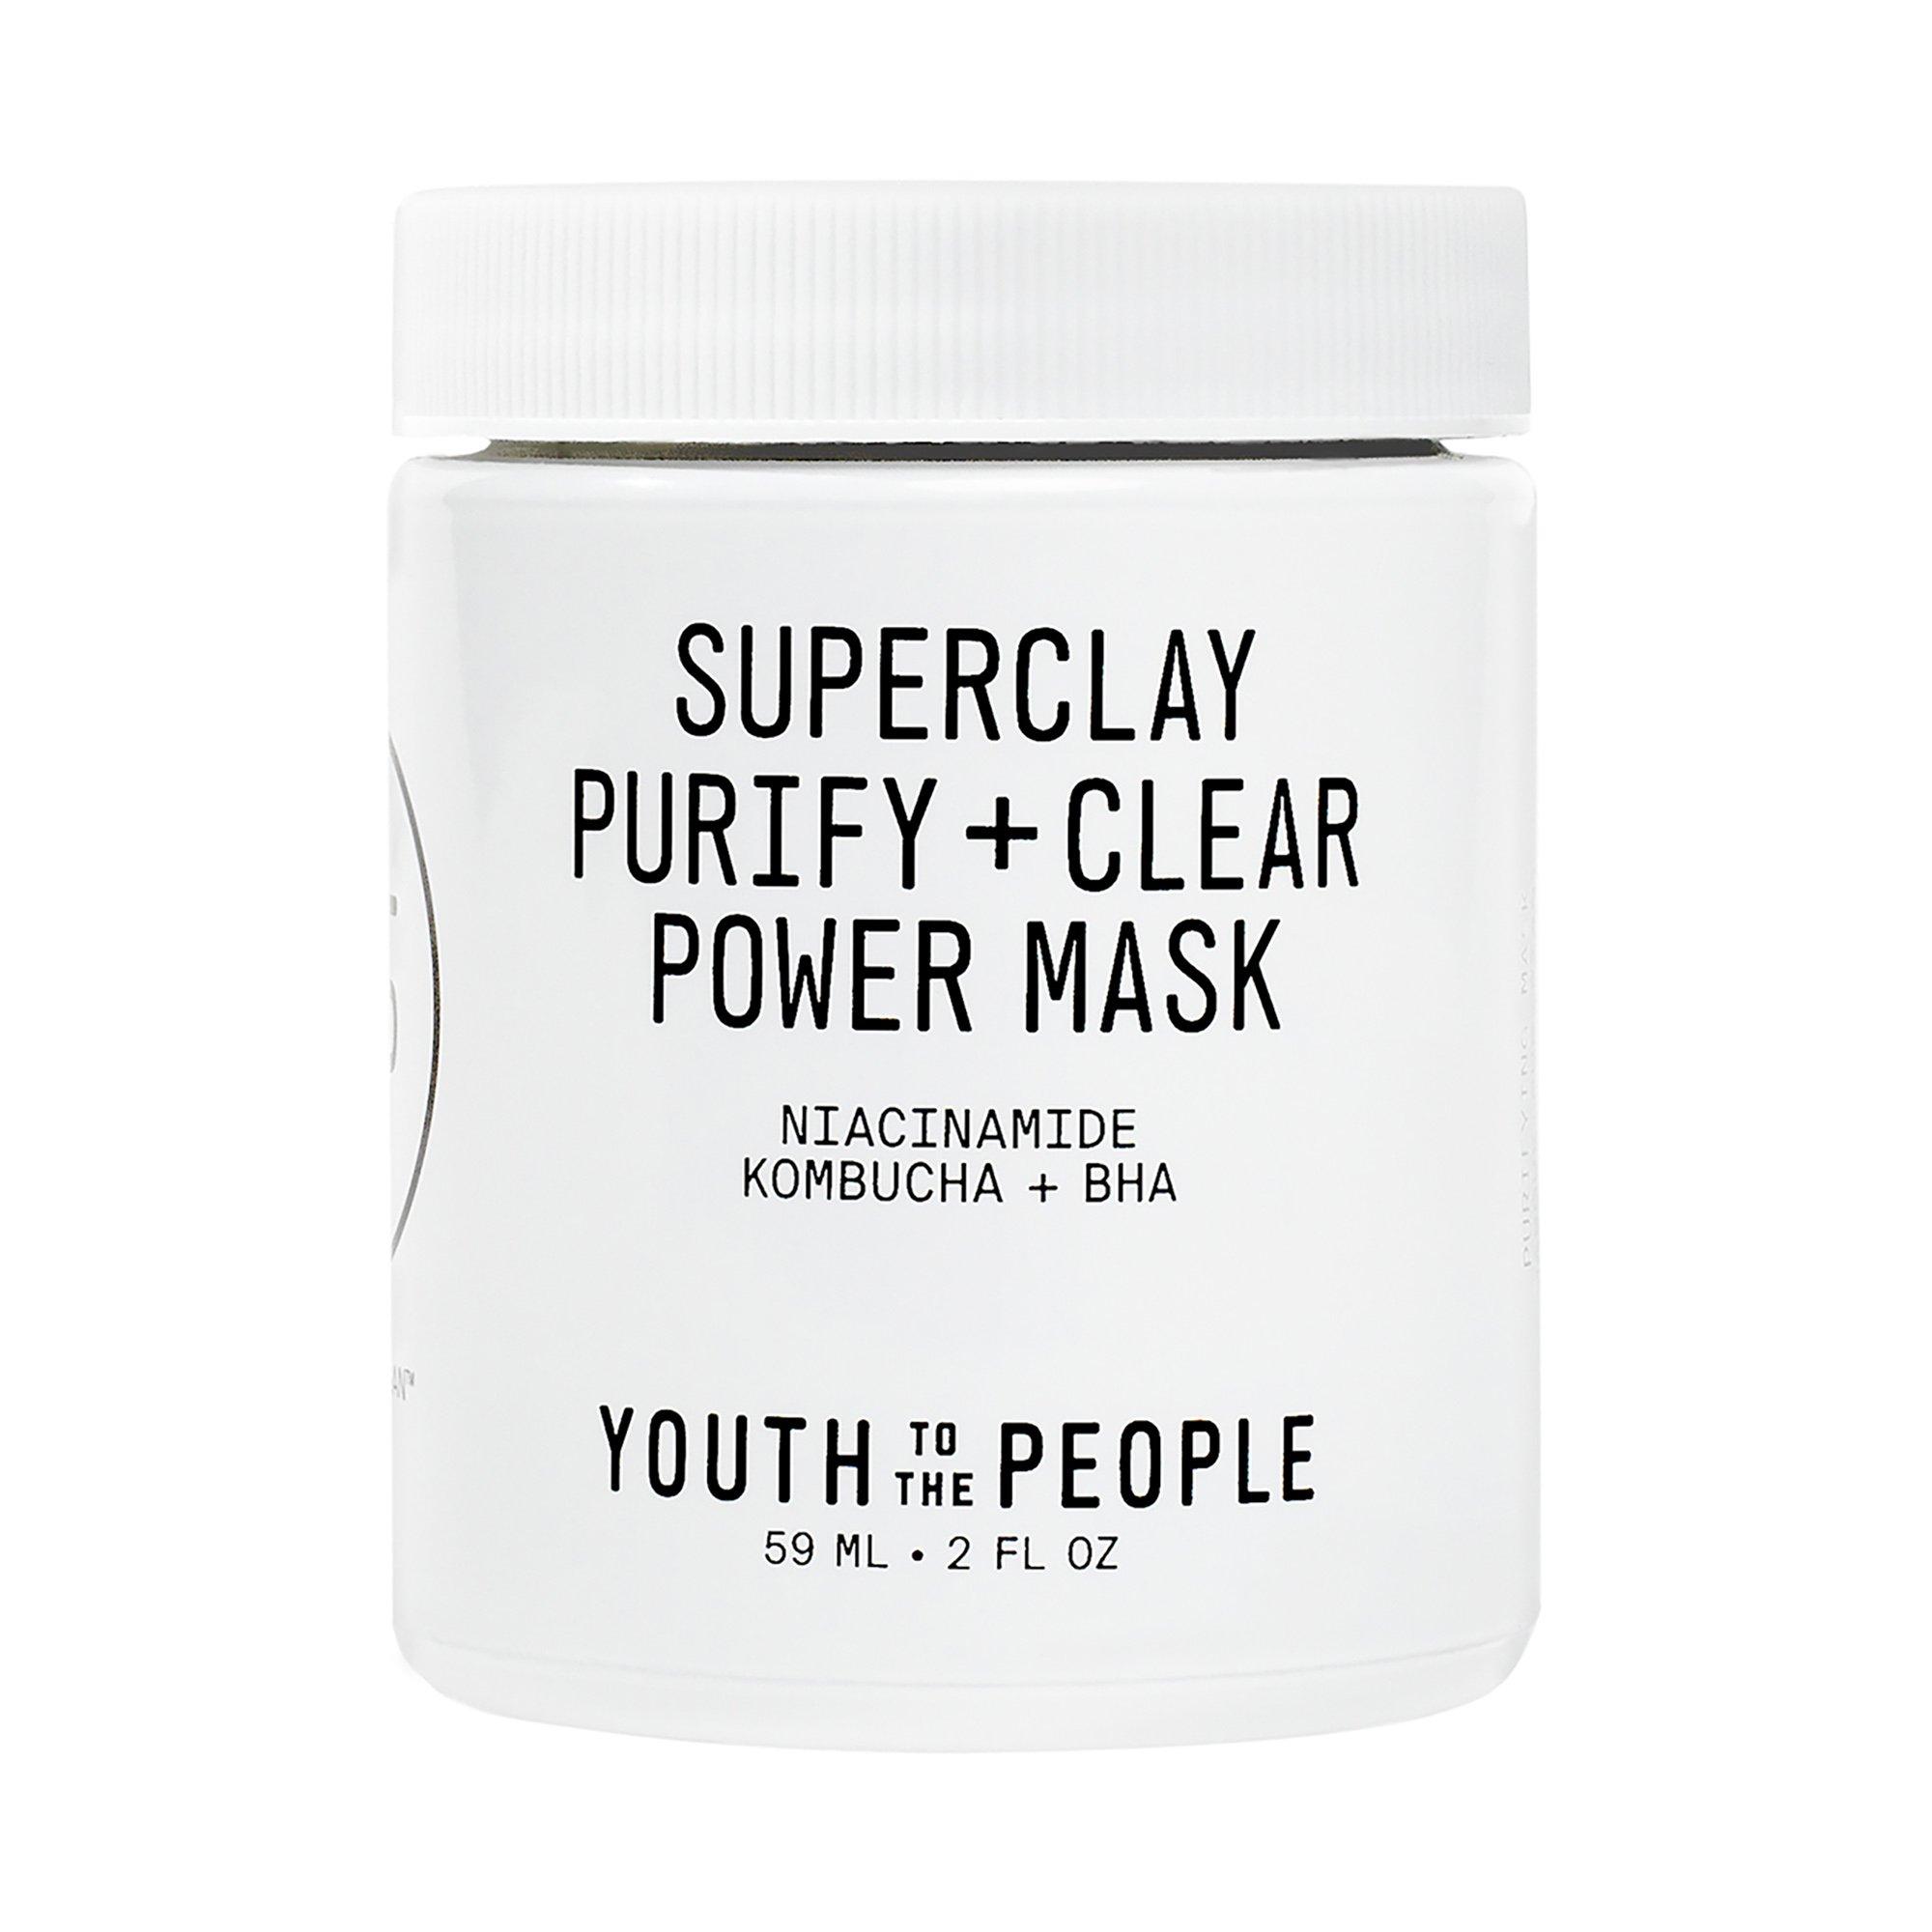 Image of YOUTH TO THE PEOPLE Superclay Purify + Clear Power Mask - 59ML